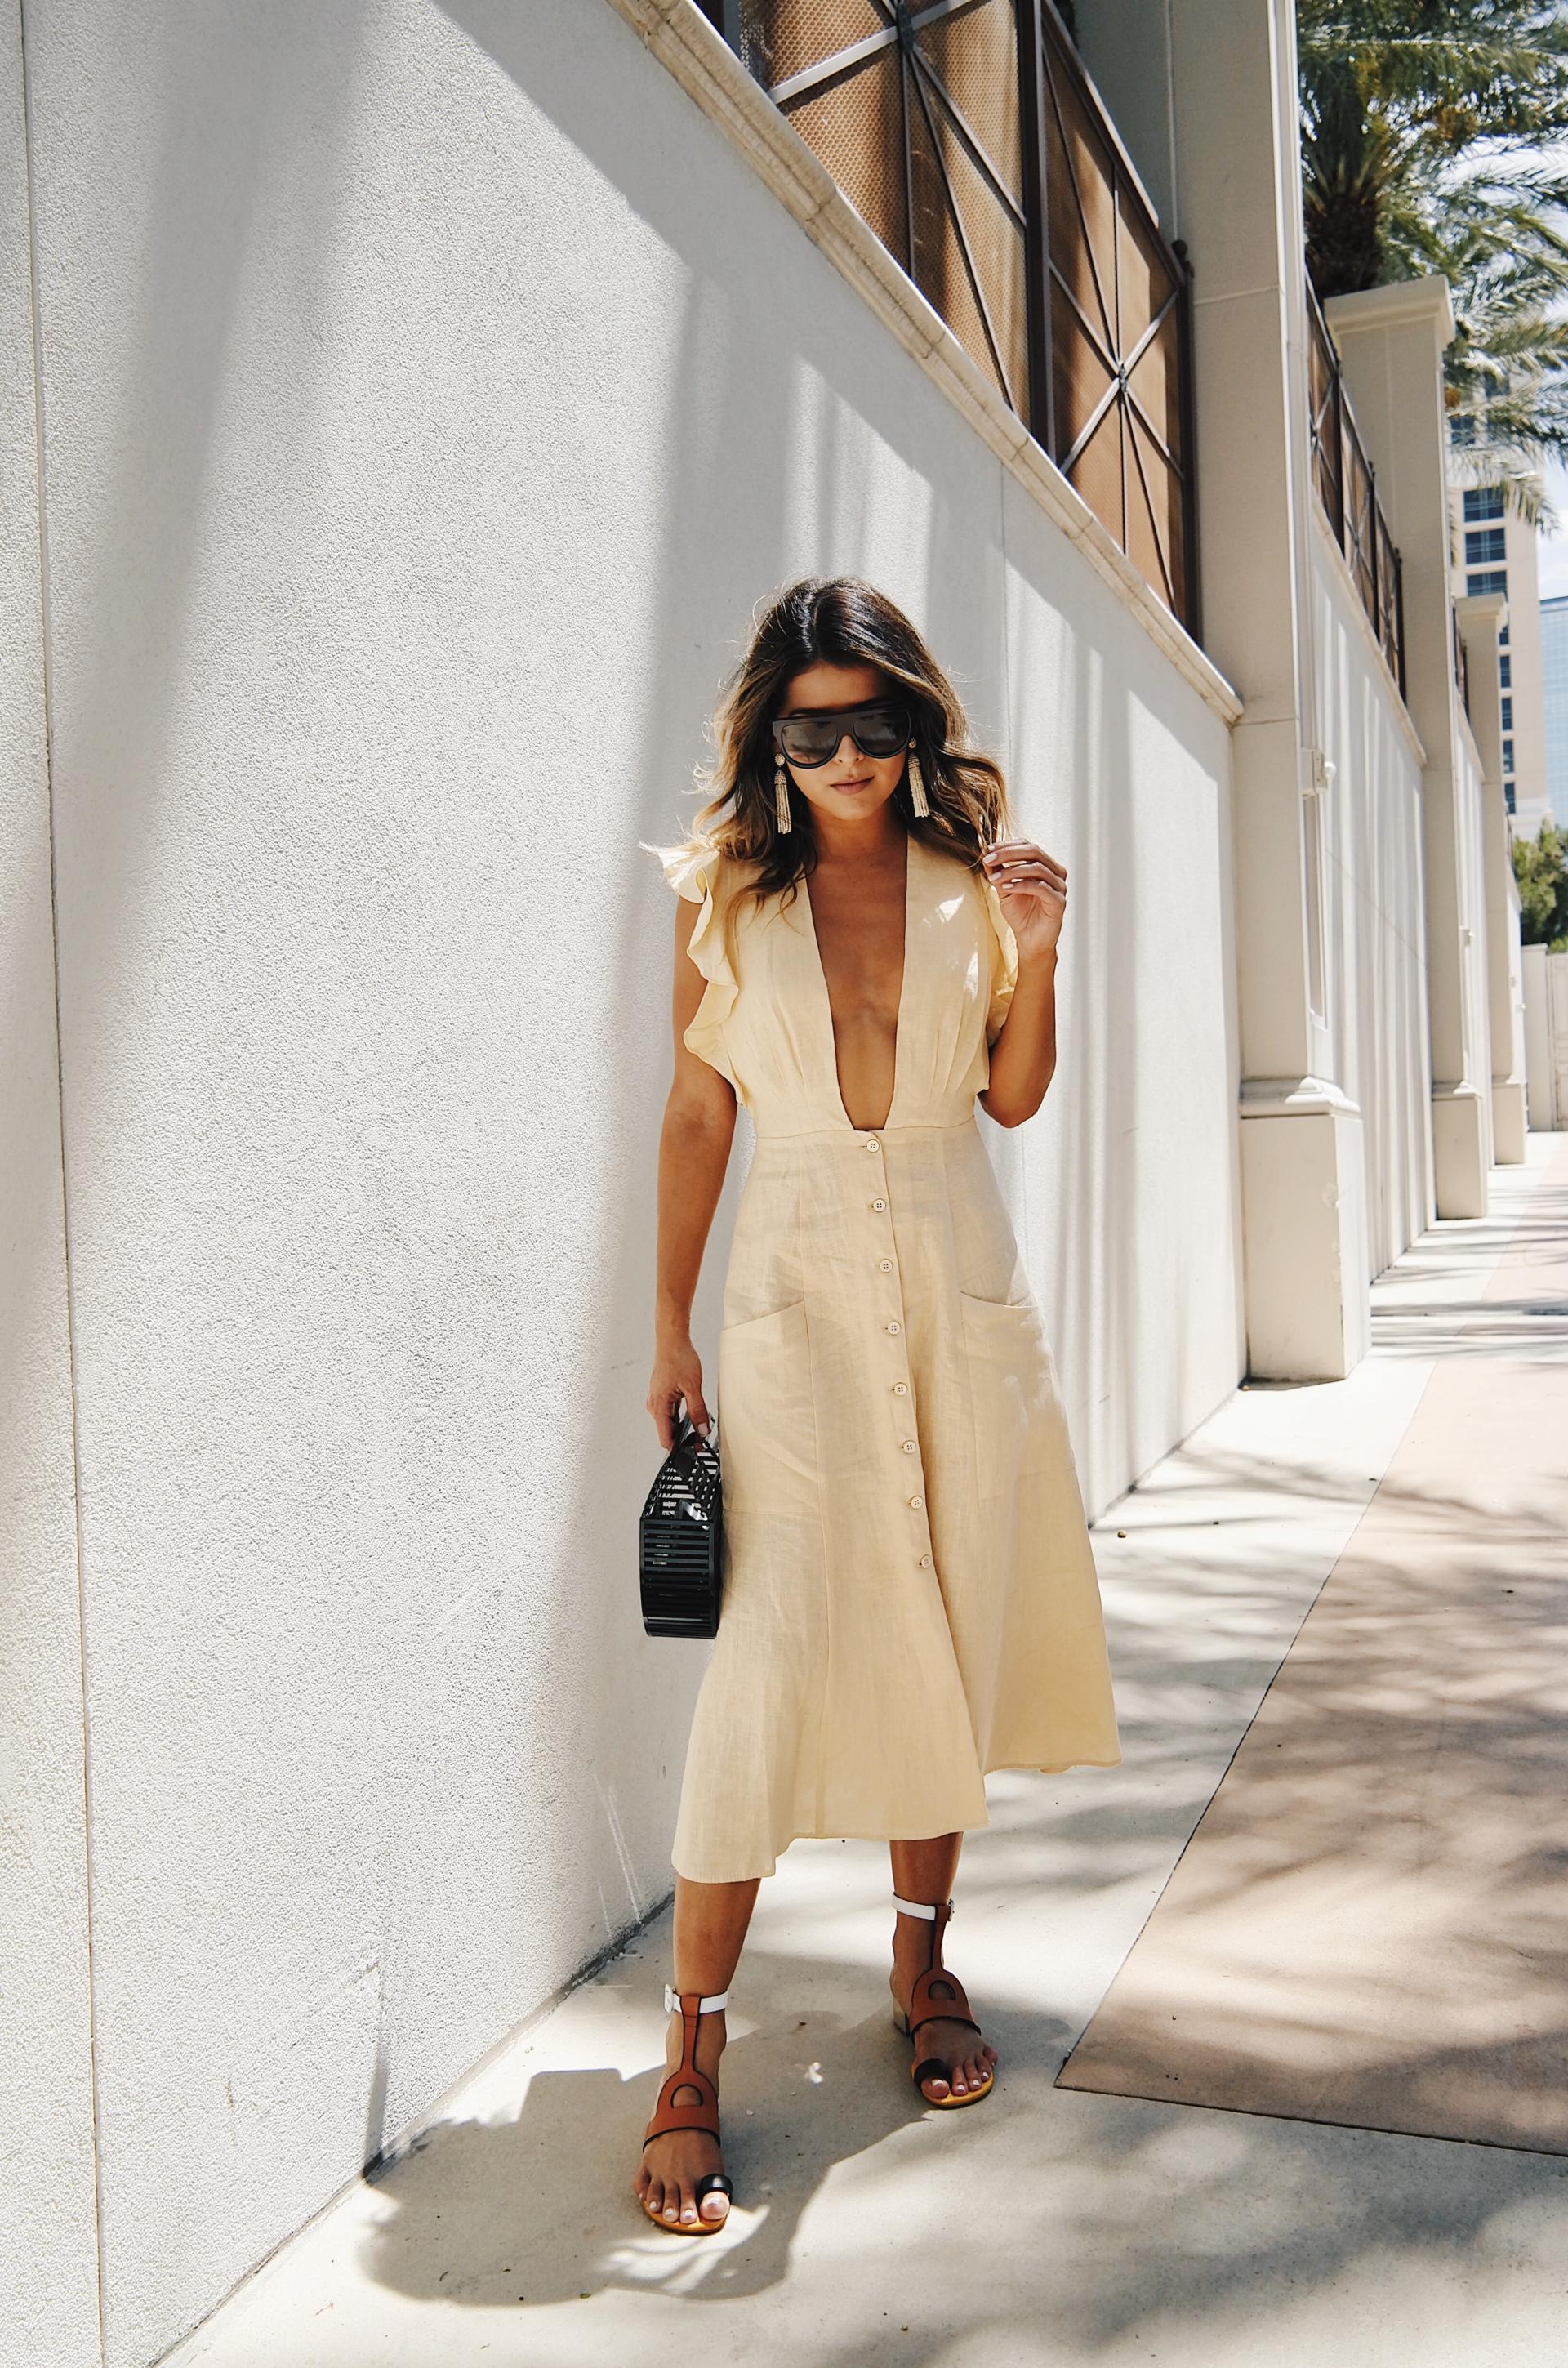 5 ways to look stylish in las Vegas // The Girl From Panama @pamhetlinger